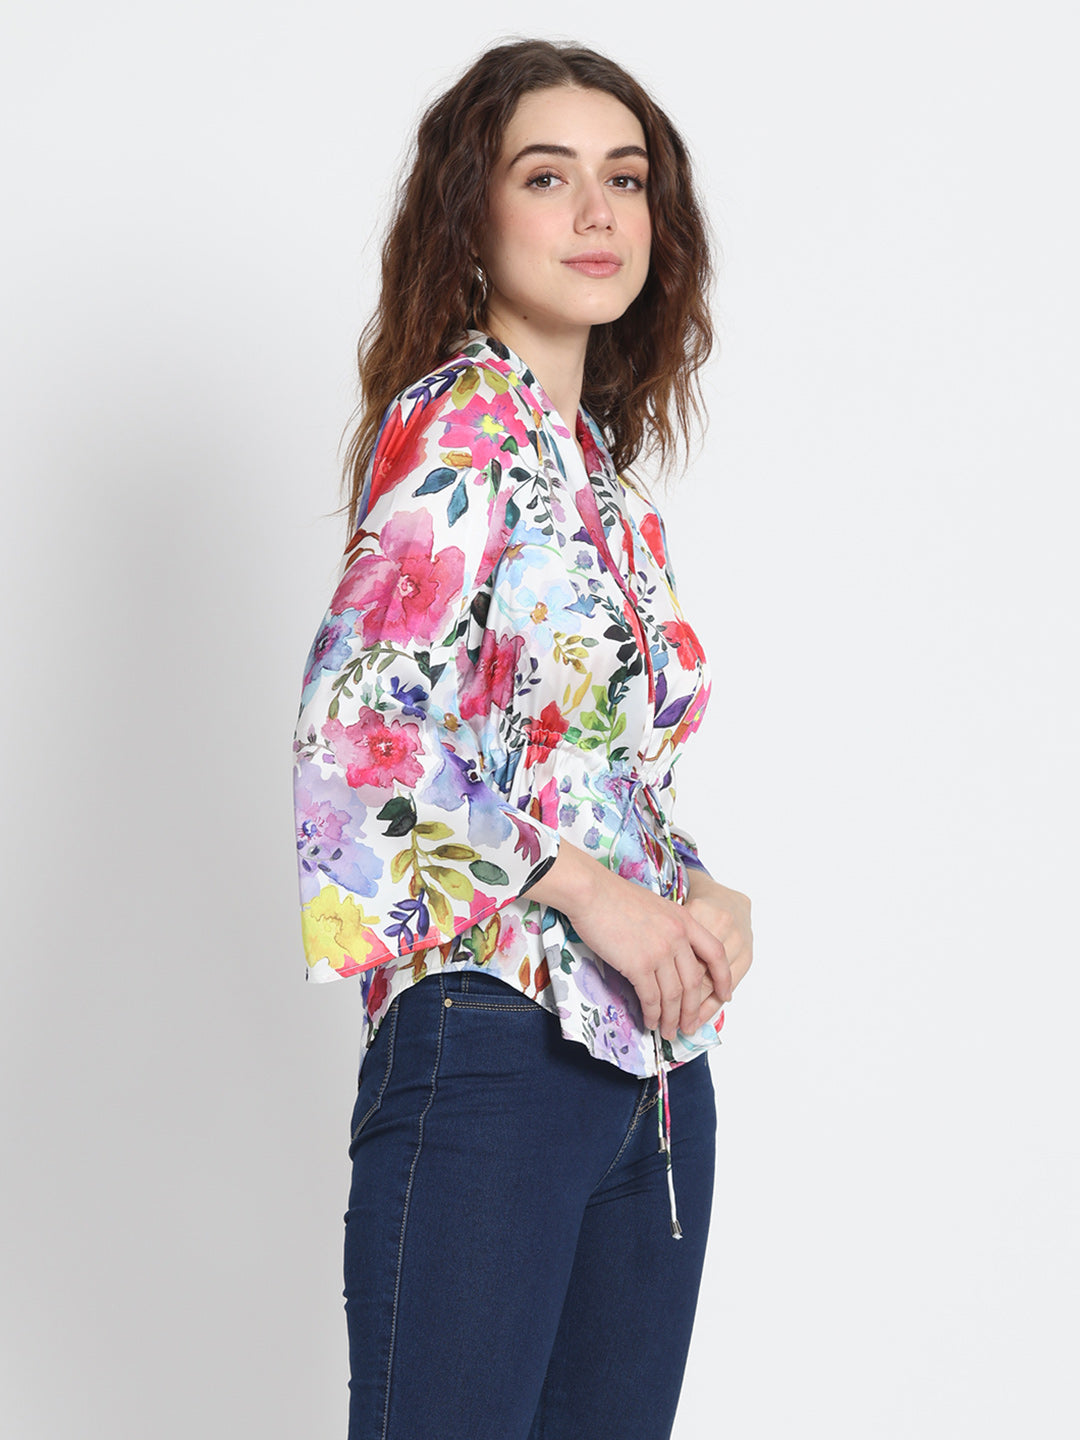 Charlotte Cinched Shirt Jacket from Shaye , Shirt for women